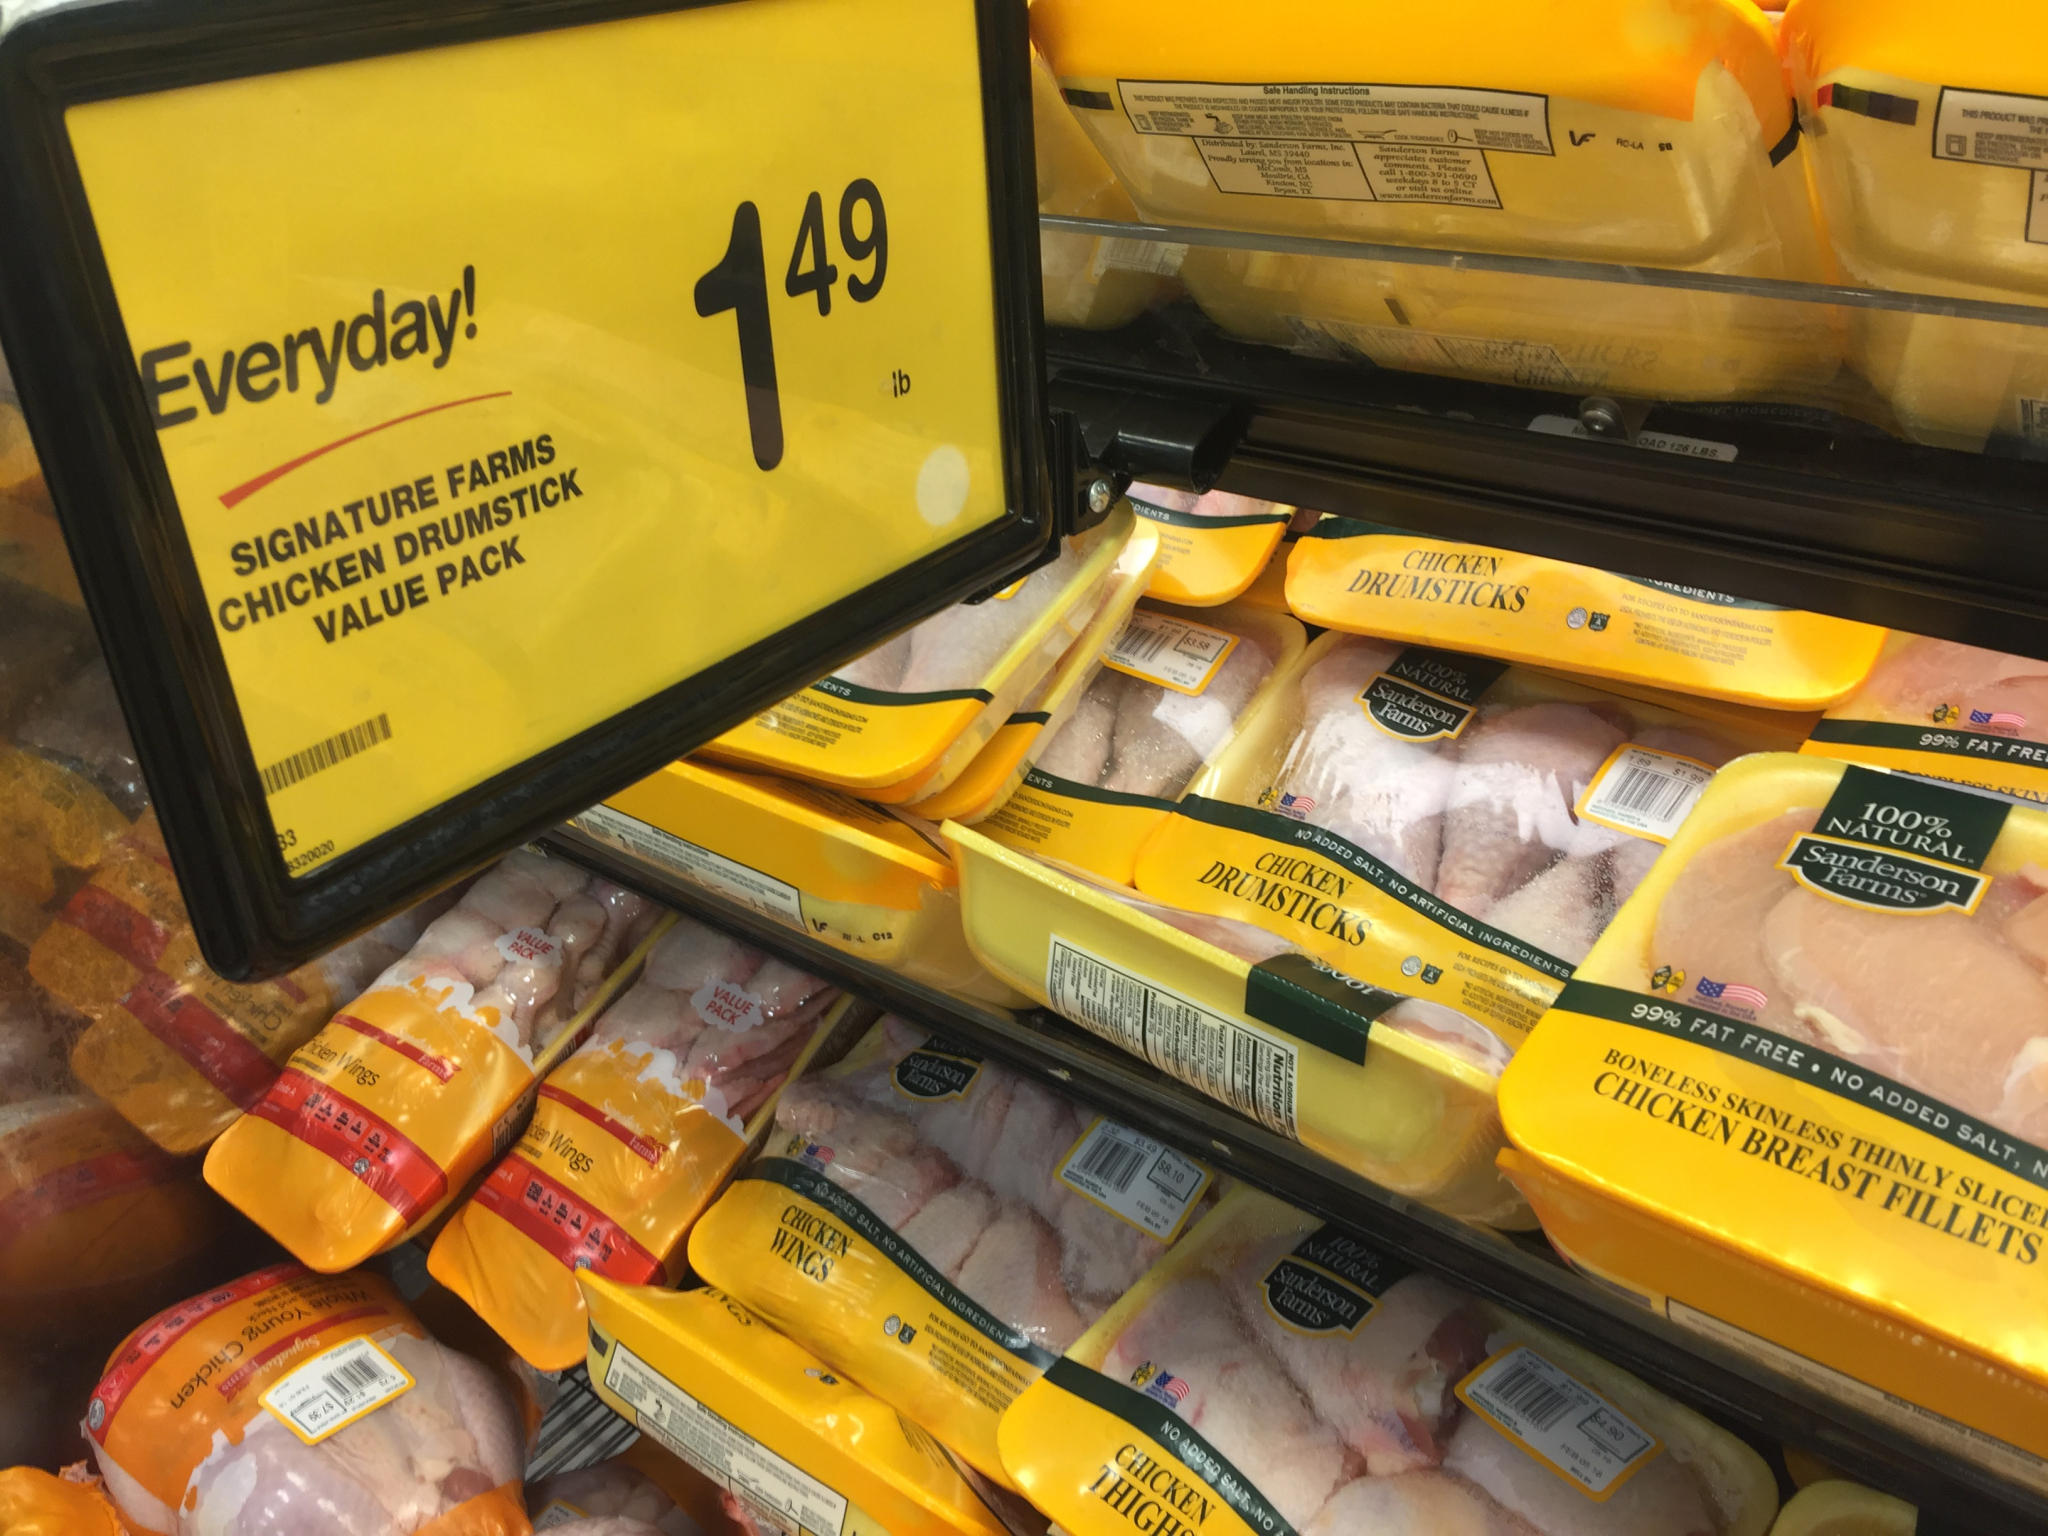 package of chicken drumsticks the cheapest meat on sale